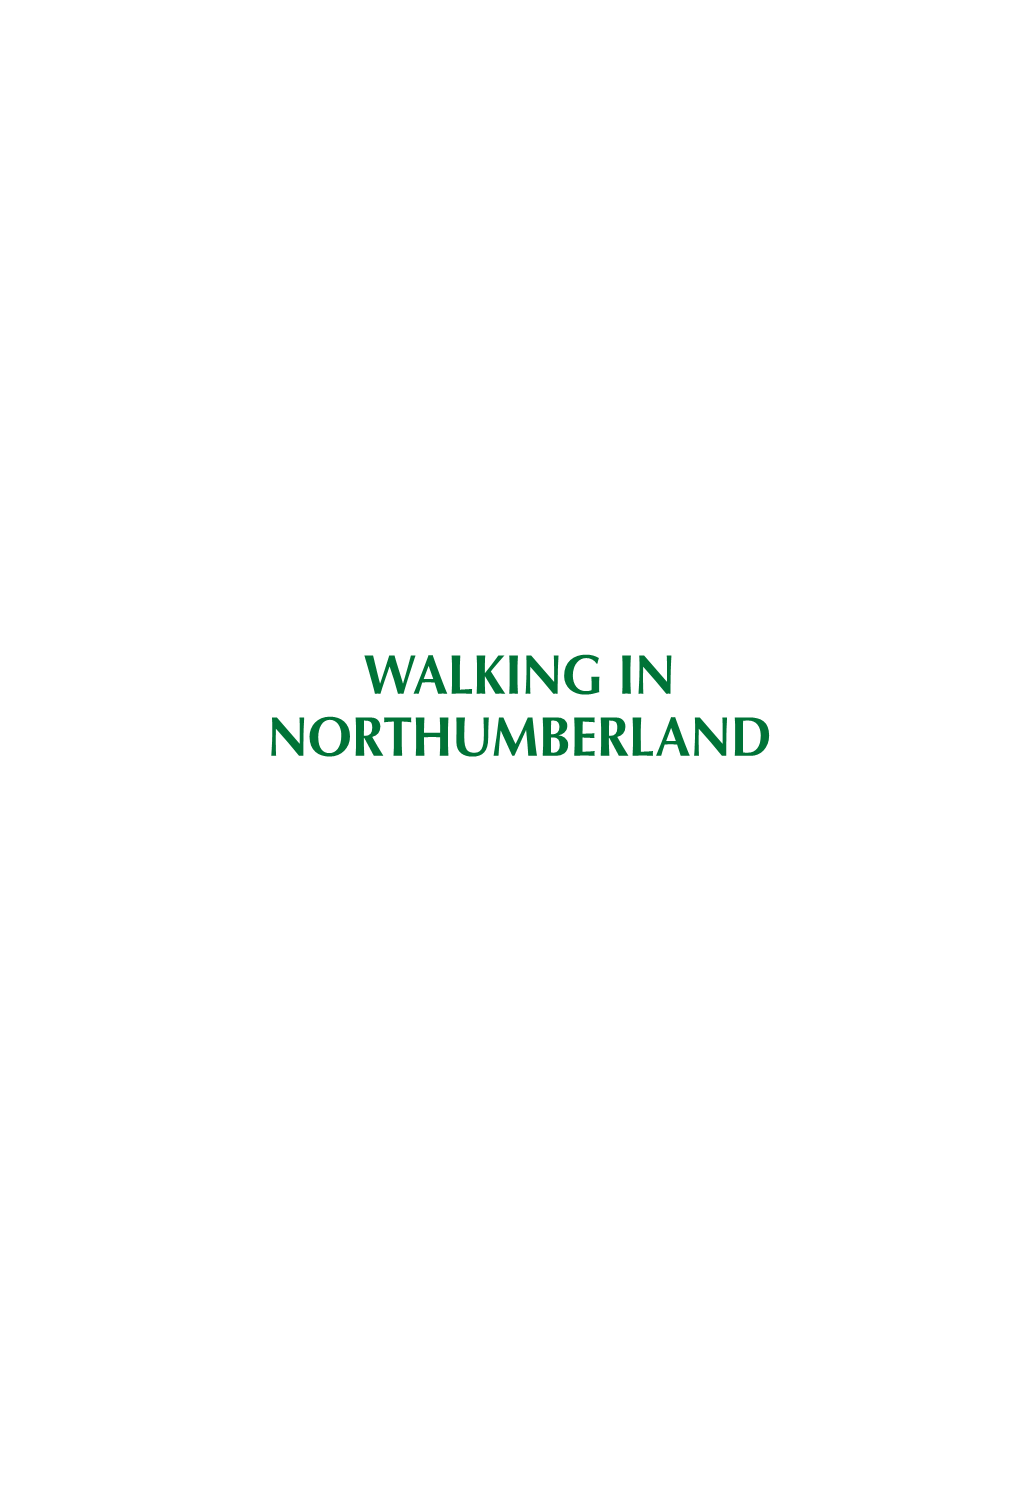 WALKING in NORTHUMBERLAND About the Author Vivienne Is an Award-Winning Freelance Writer and Photographer Specialis- Ing in Travel and the Outdoors